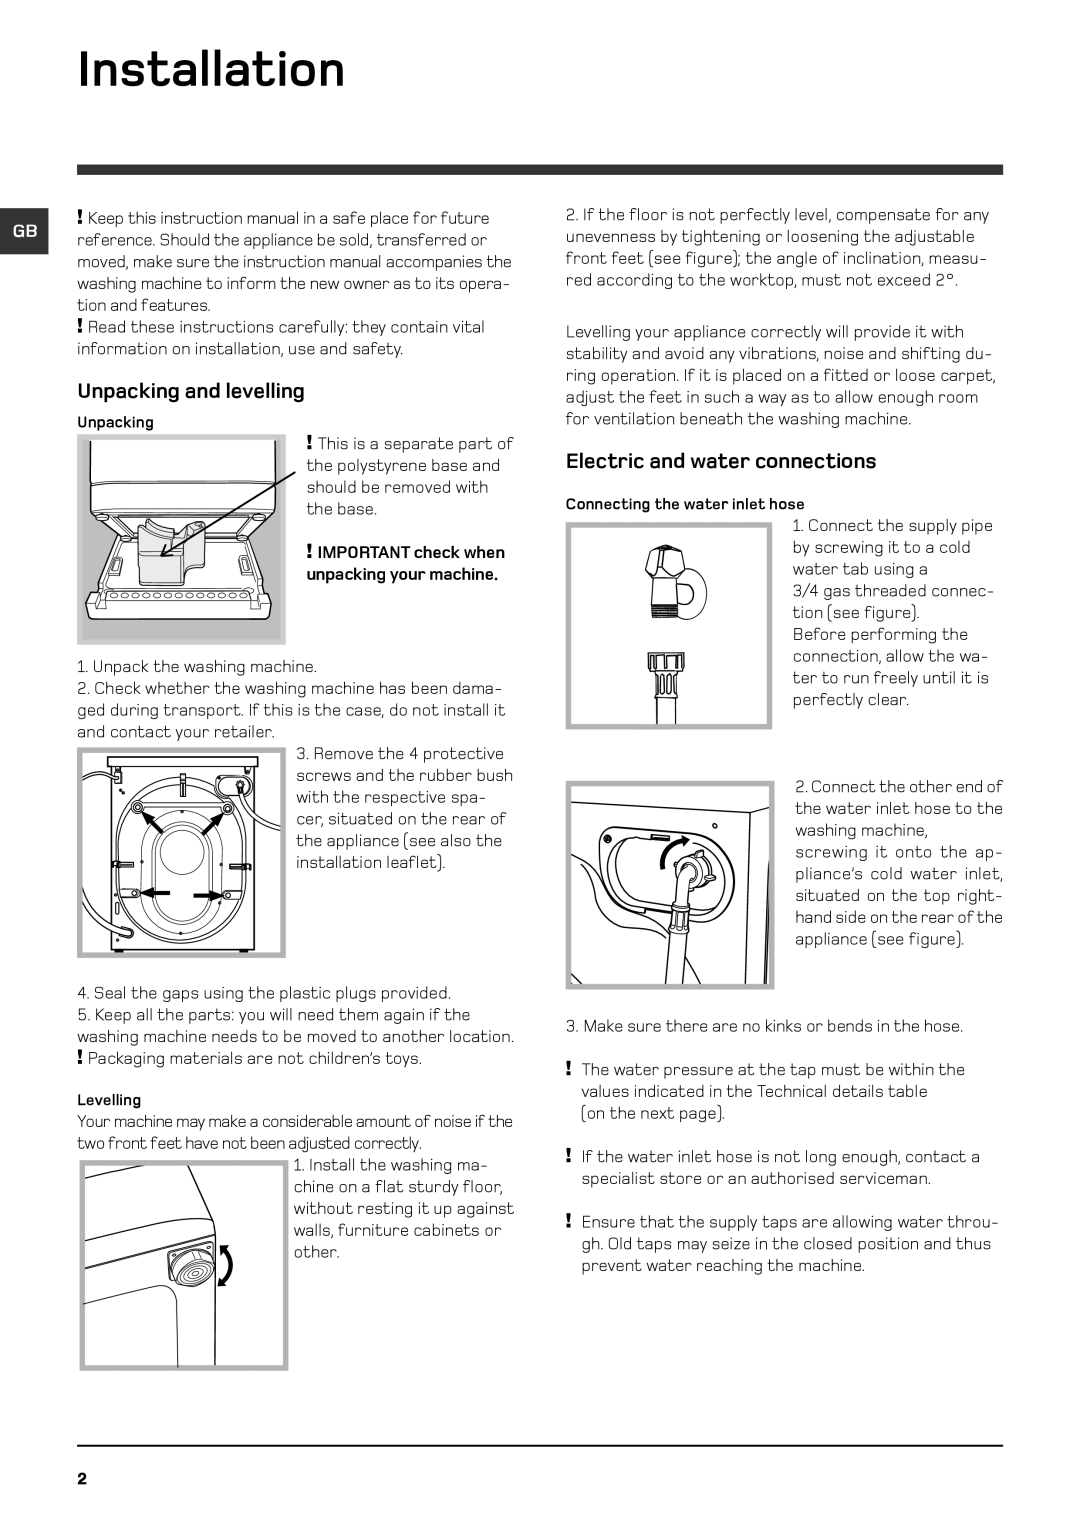 Hotpoint WDD instruction manual Installation, Unpacking and levelling, Electric and water connections 